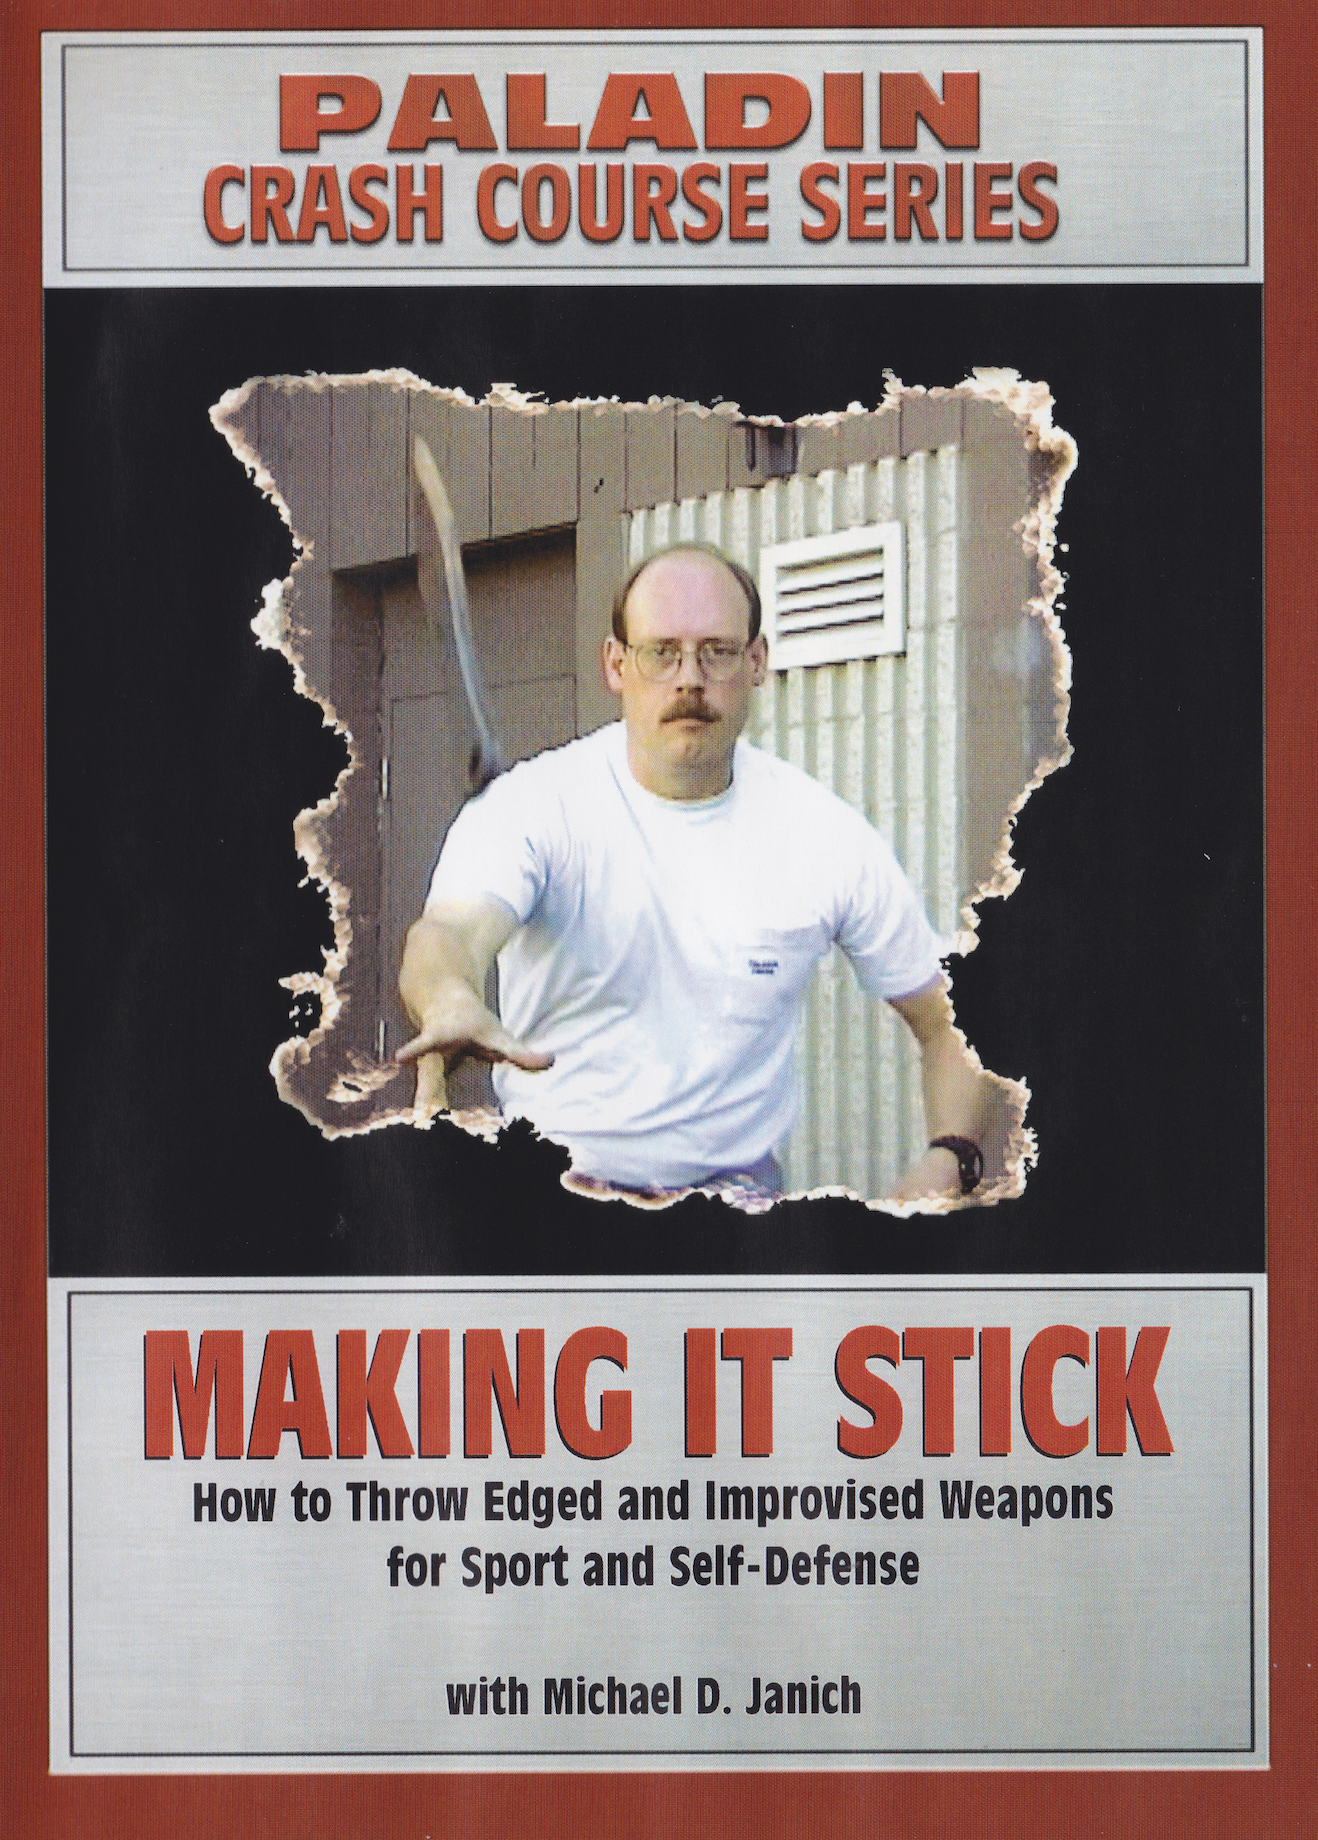 Making it Stick DVD by Michael Janich (Preowned)